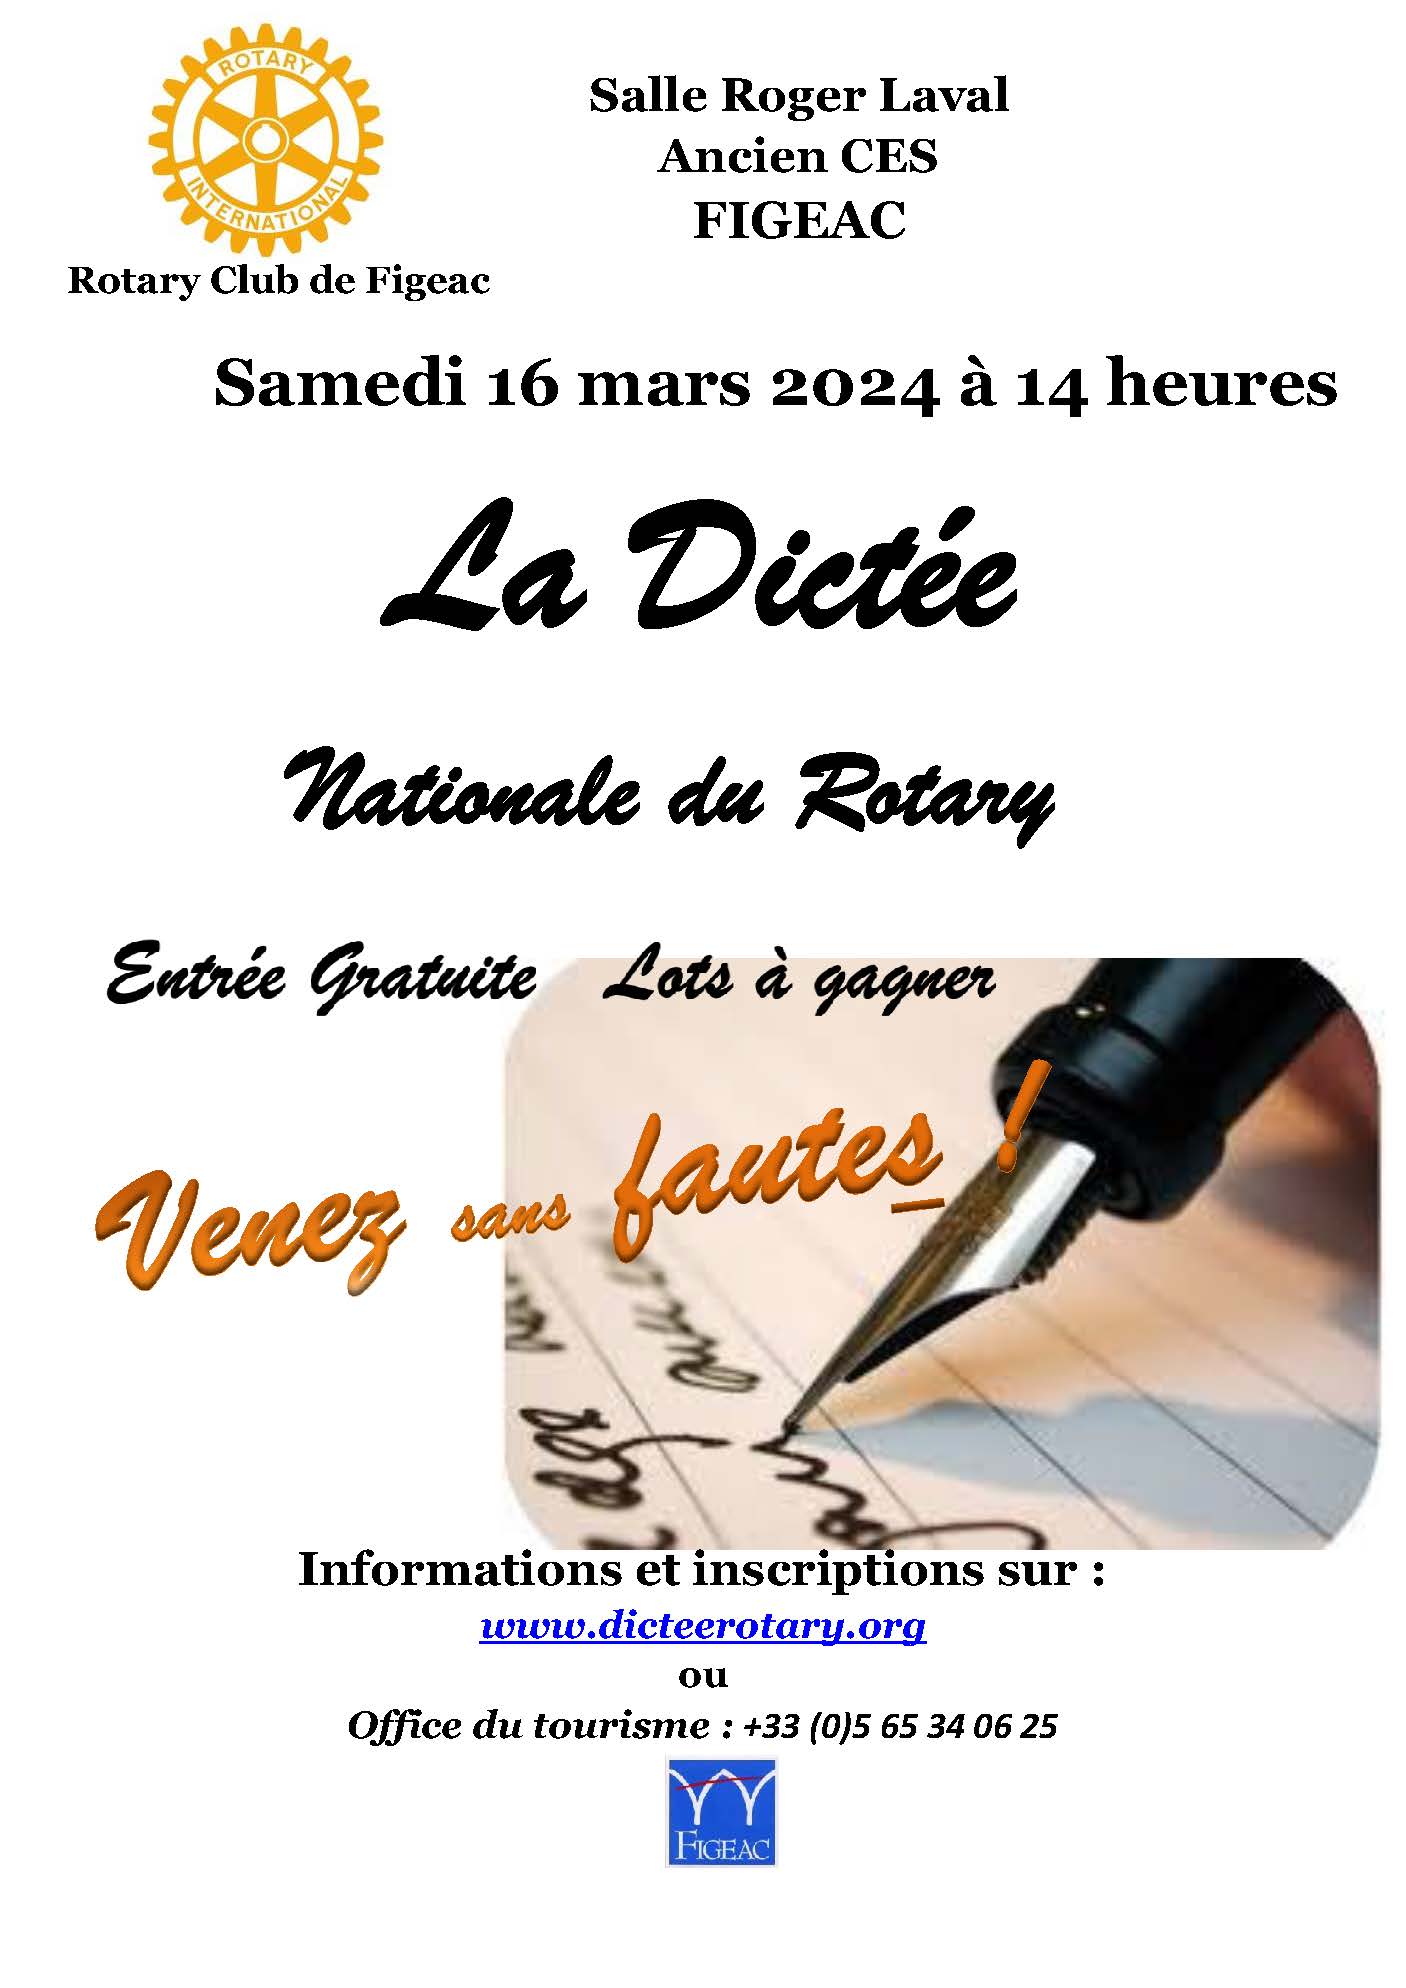 2024-dictee-rotary-ville-figeac